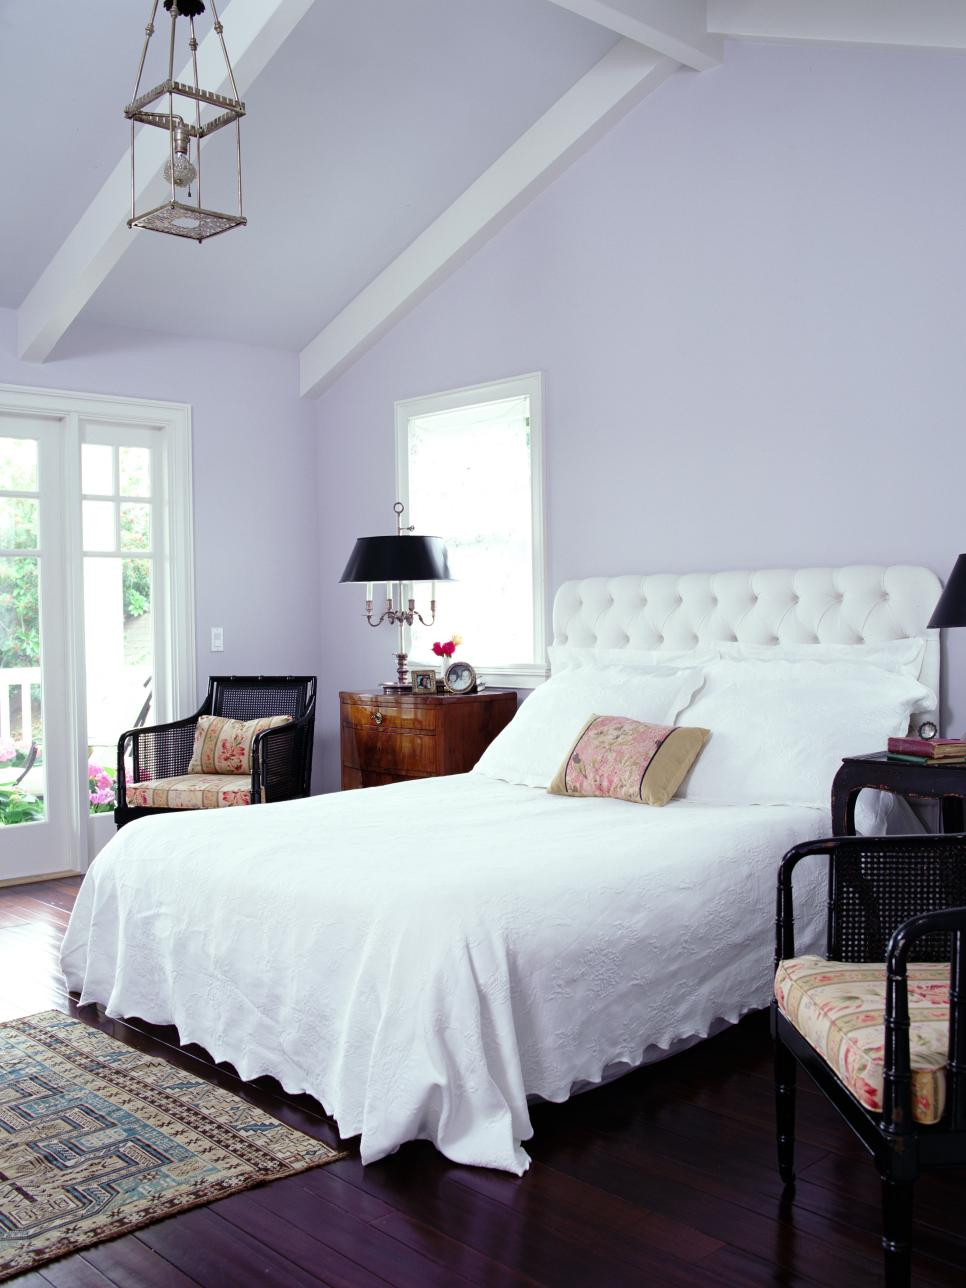 Lavender Bedroom Walls
 10 Bedrooms to Inspire You to Go Lavender